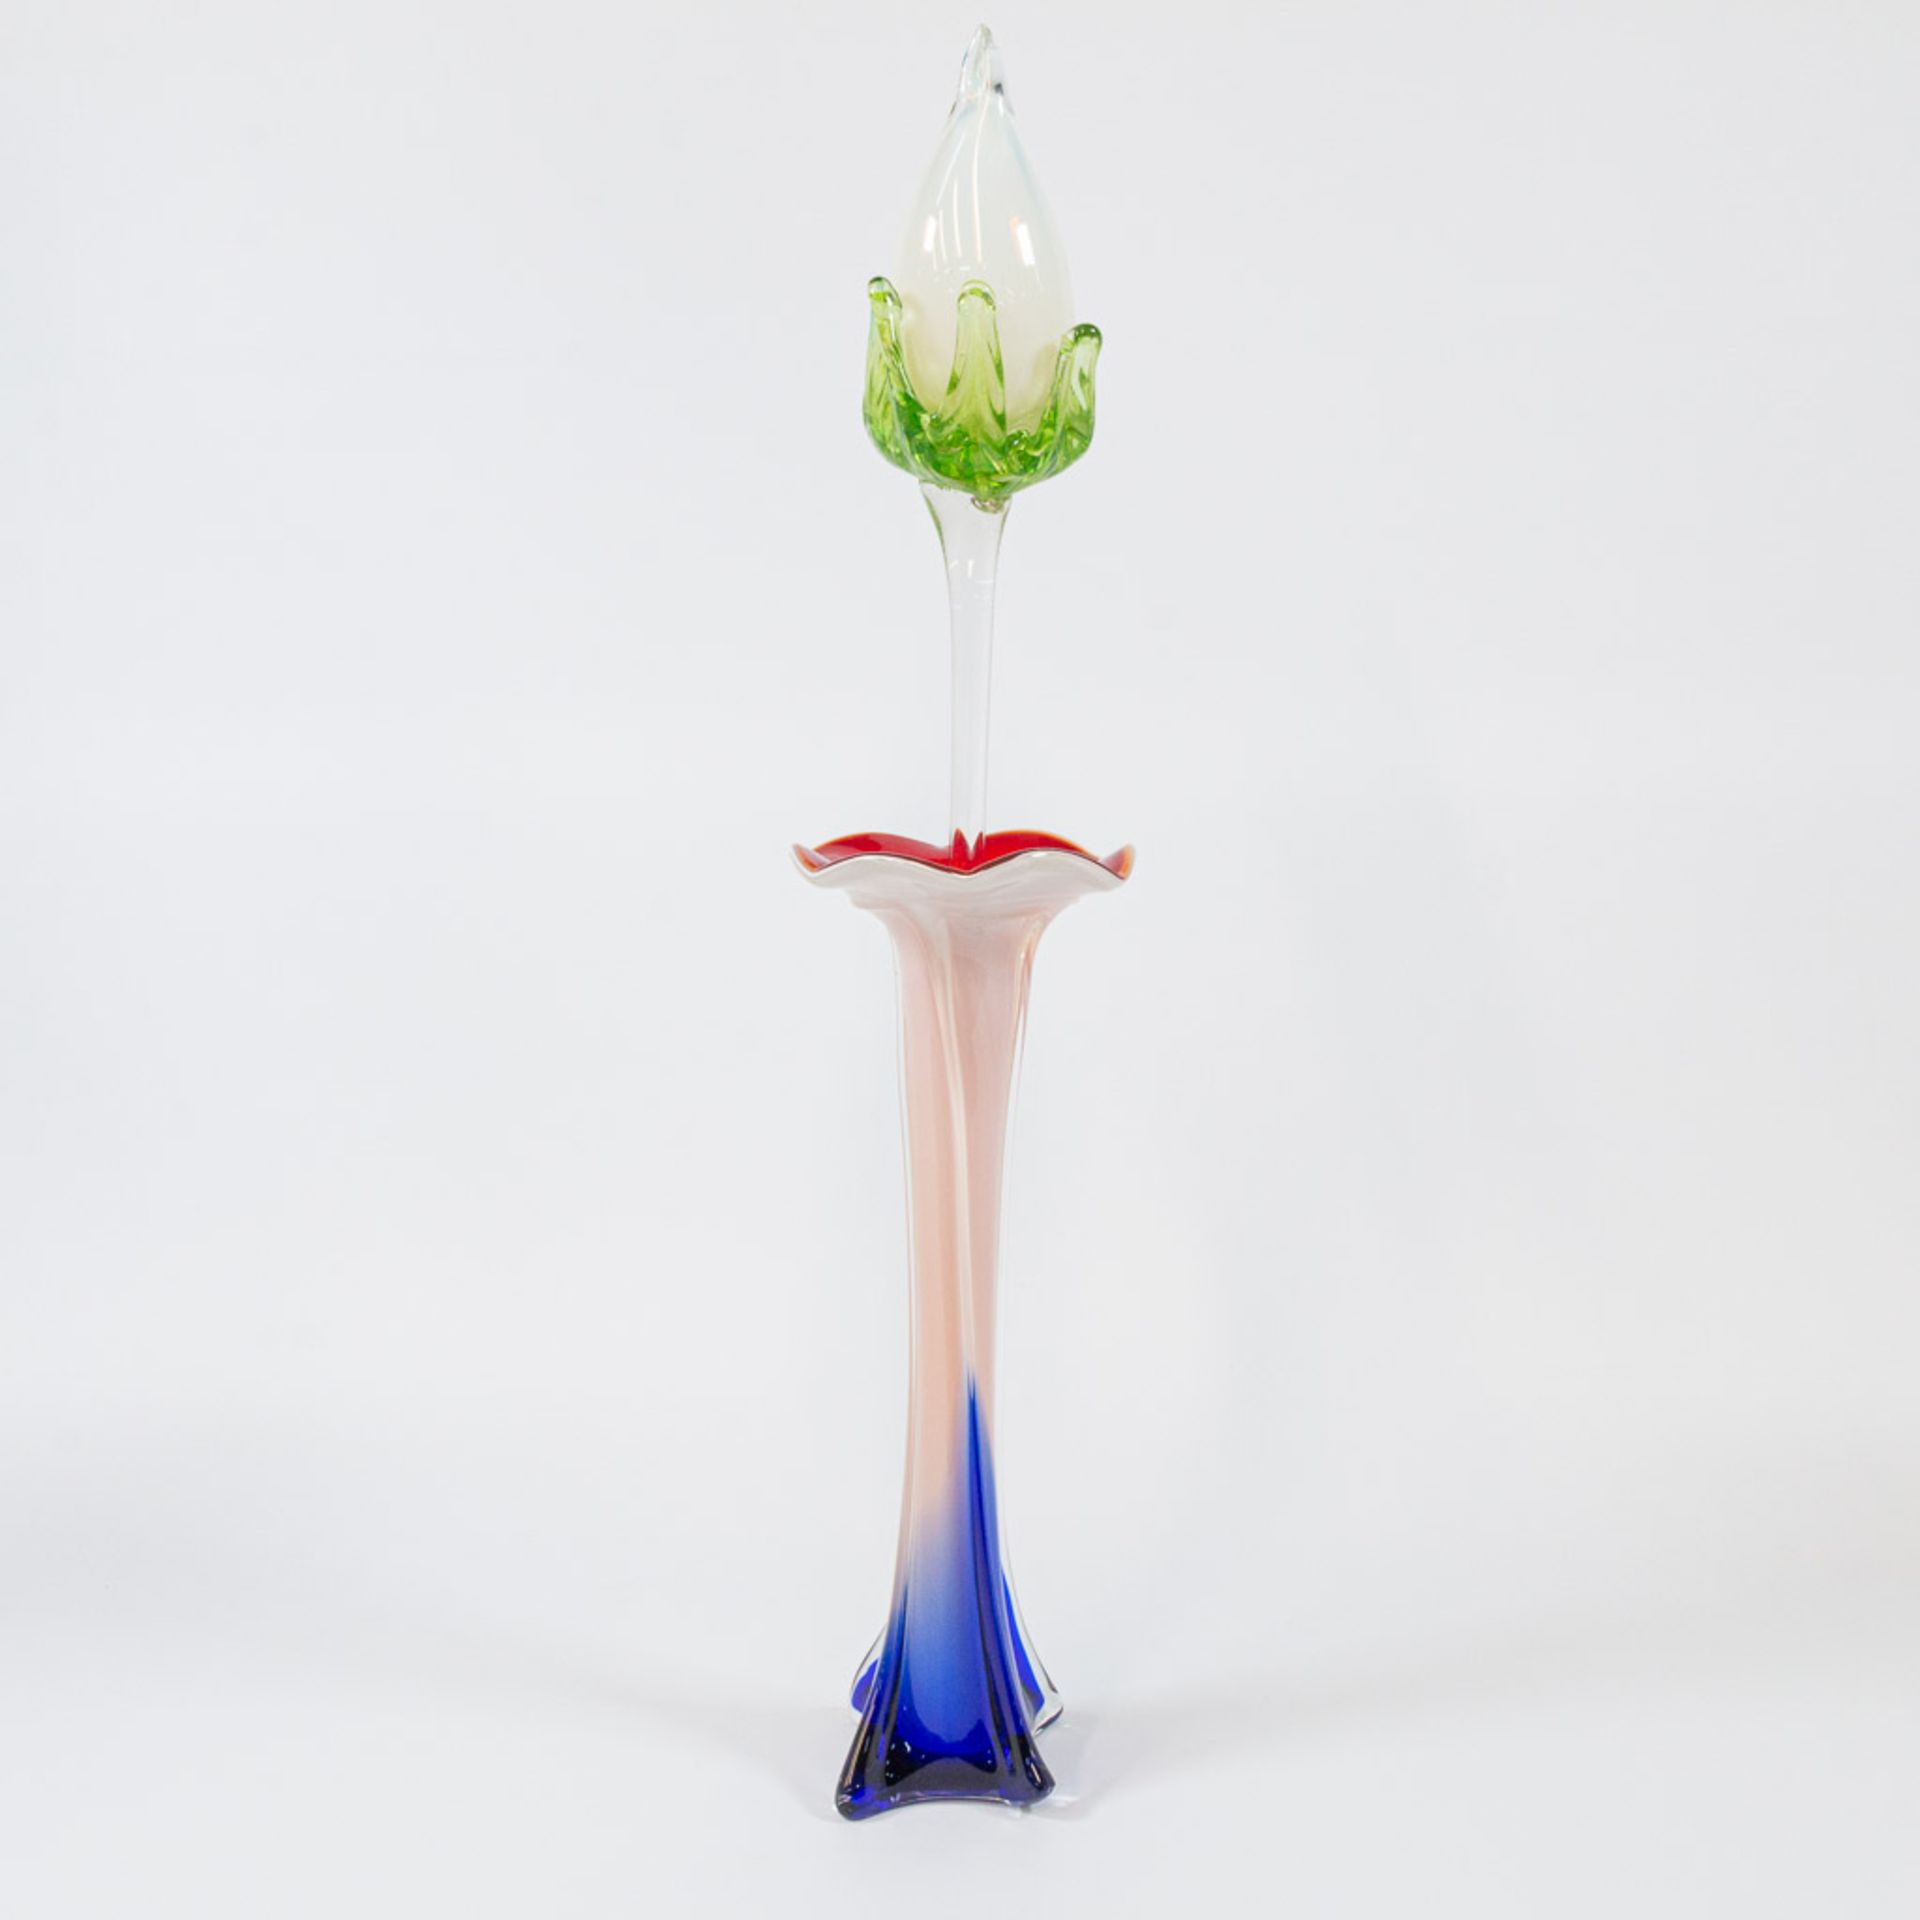 A collection of 4 vases and 4 glass flowers made in Murano, Italy. - Image 21 of 49